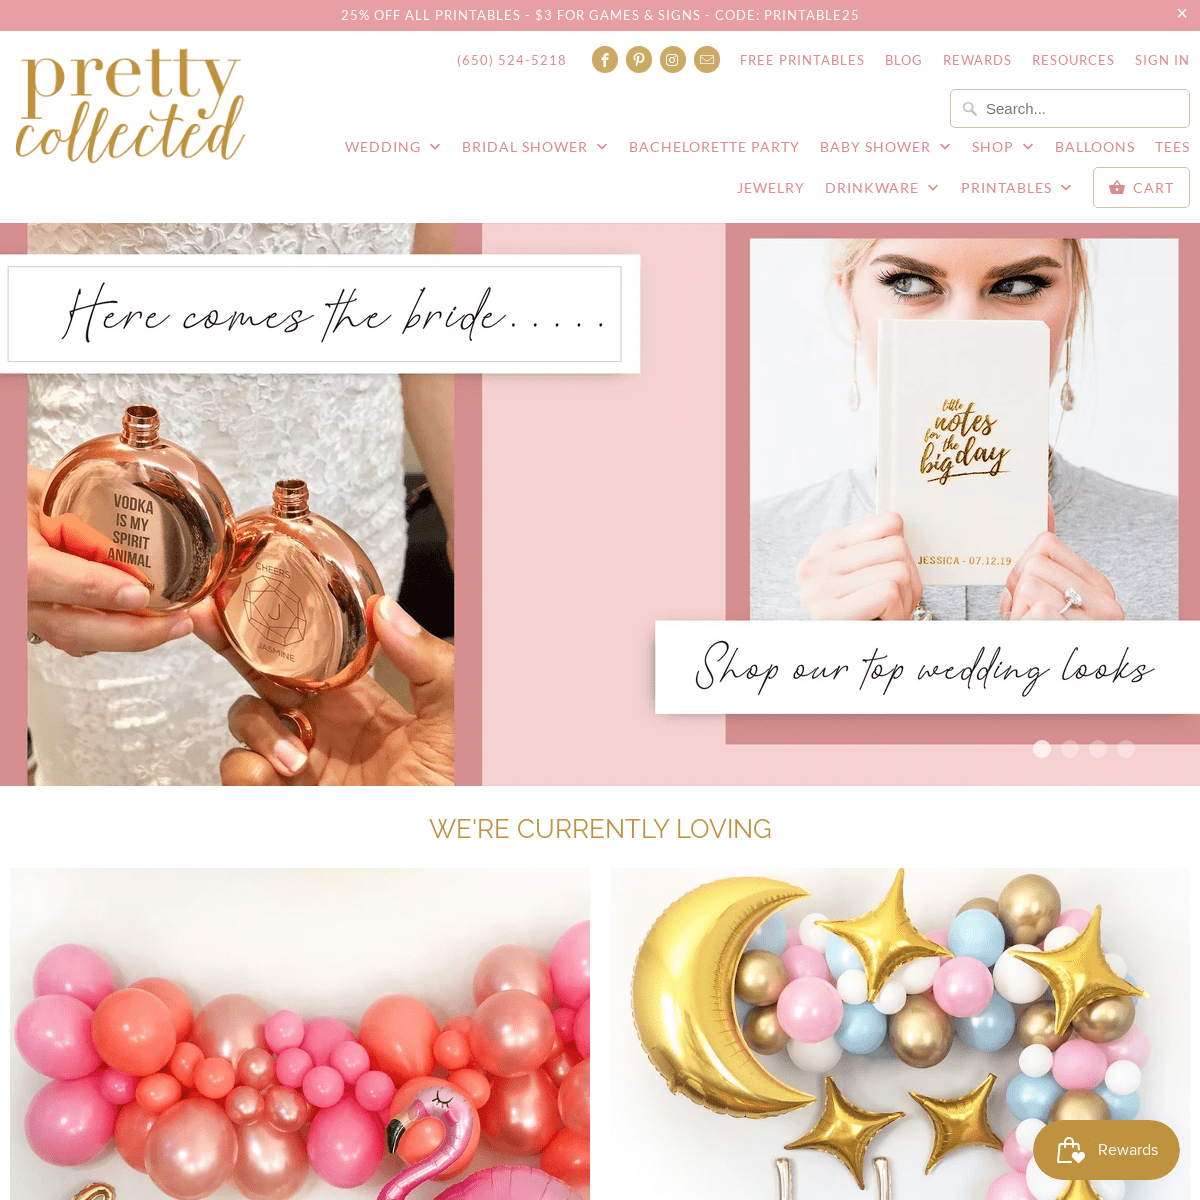 A complete backup of prettycollected.com